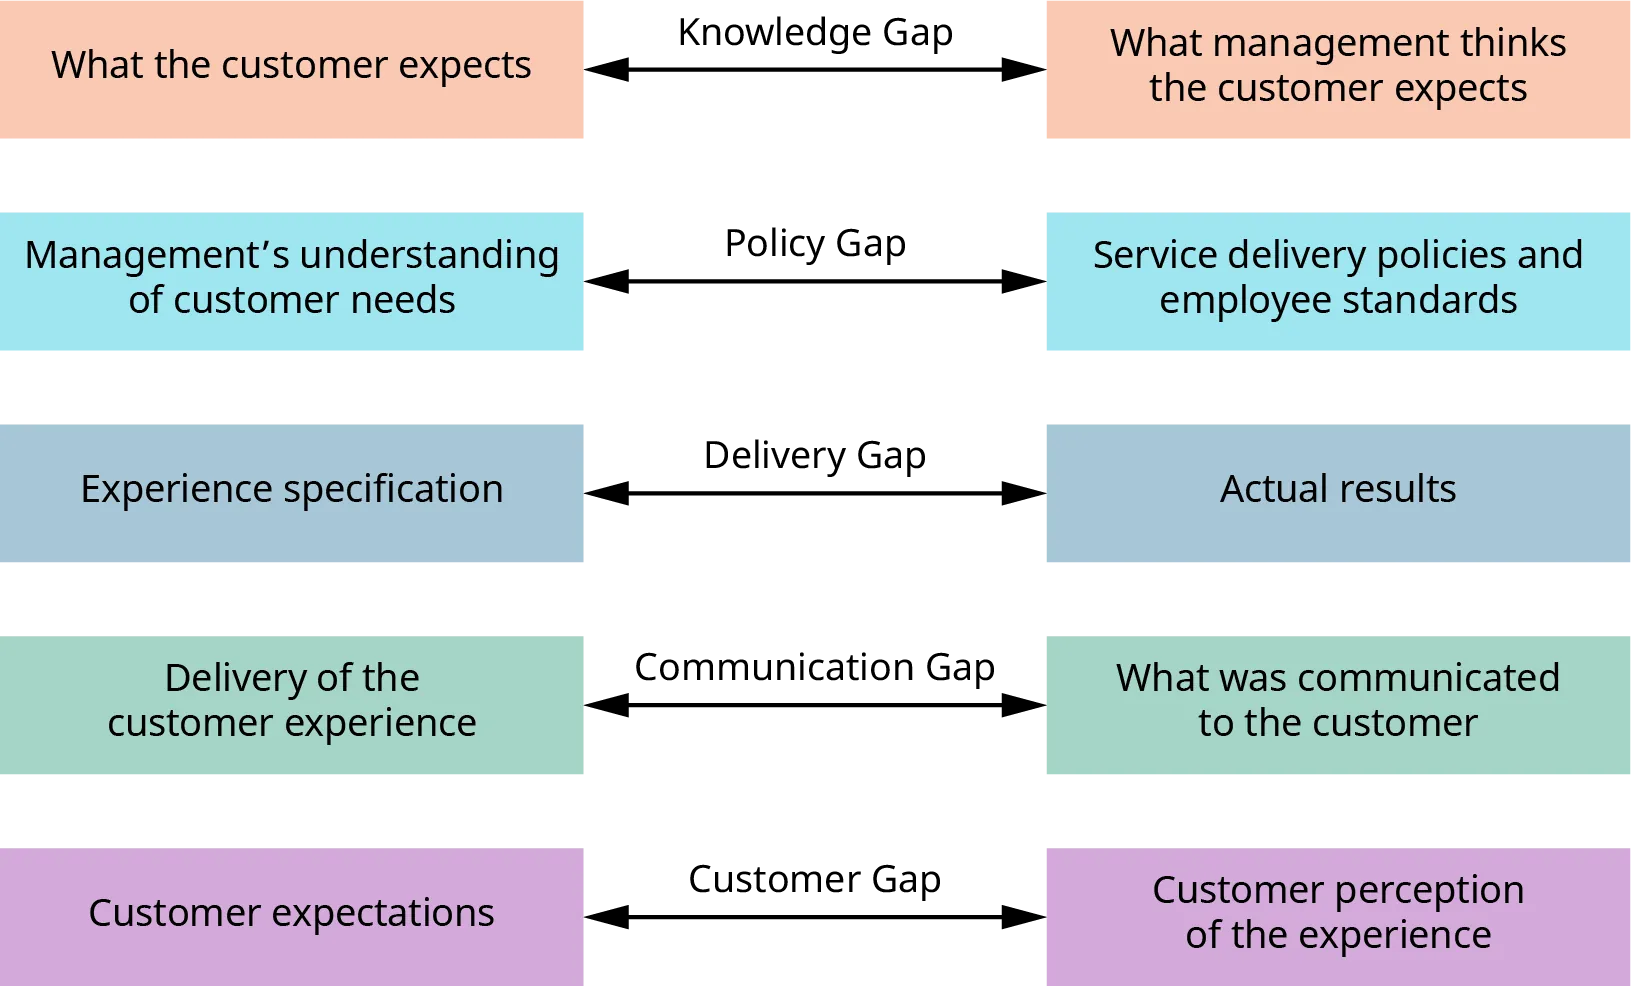 The five gaps included in the gap model of service quality are knowledge gap, policy gap, delivery gap, communication gap, and customer gap. The knowledge gap is the difference between what the customer expects and what management thinks the customer expects. The policy gap is the difference between management's understanding of customer needs and service delivery policies and employee standards. The delivery gap is the difference between experience specification and actual results. The communication gap is the difference between delivery of the customer experience and what was communicated to the customer. The customer gap is the difference between customer expectations and the customer perception of the experience.